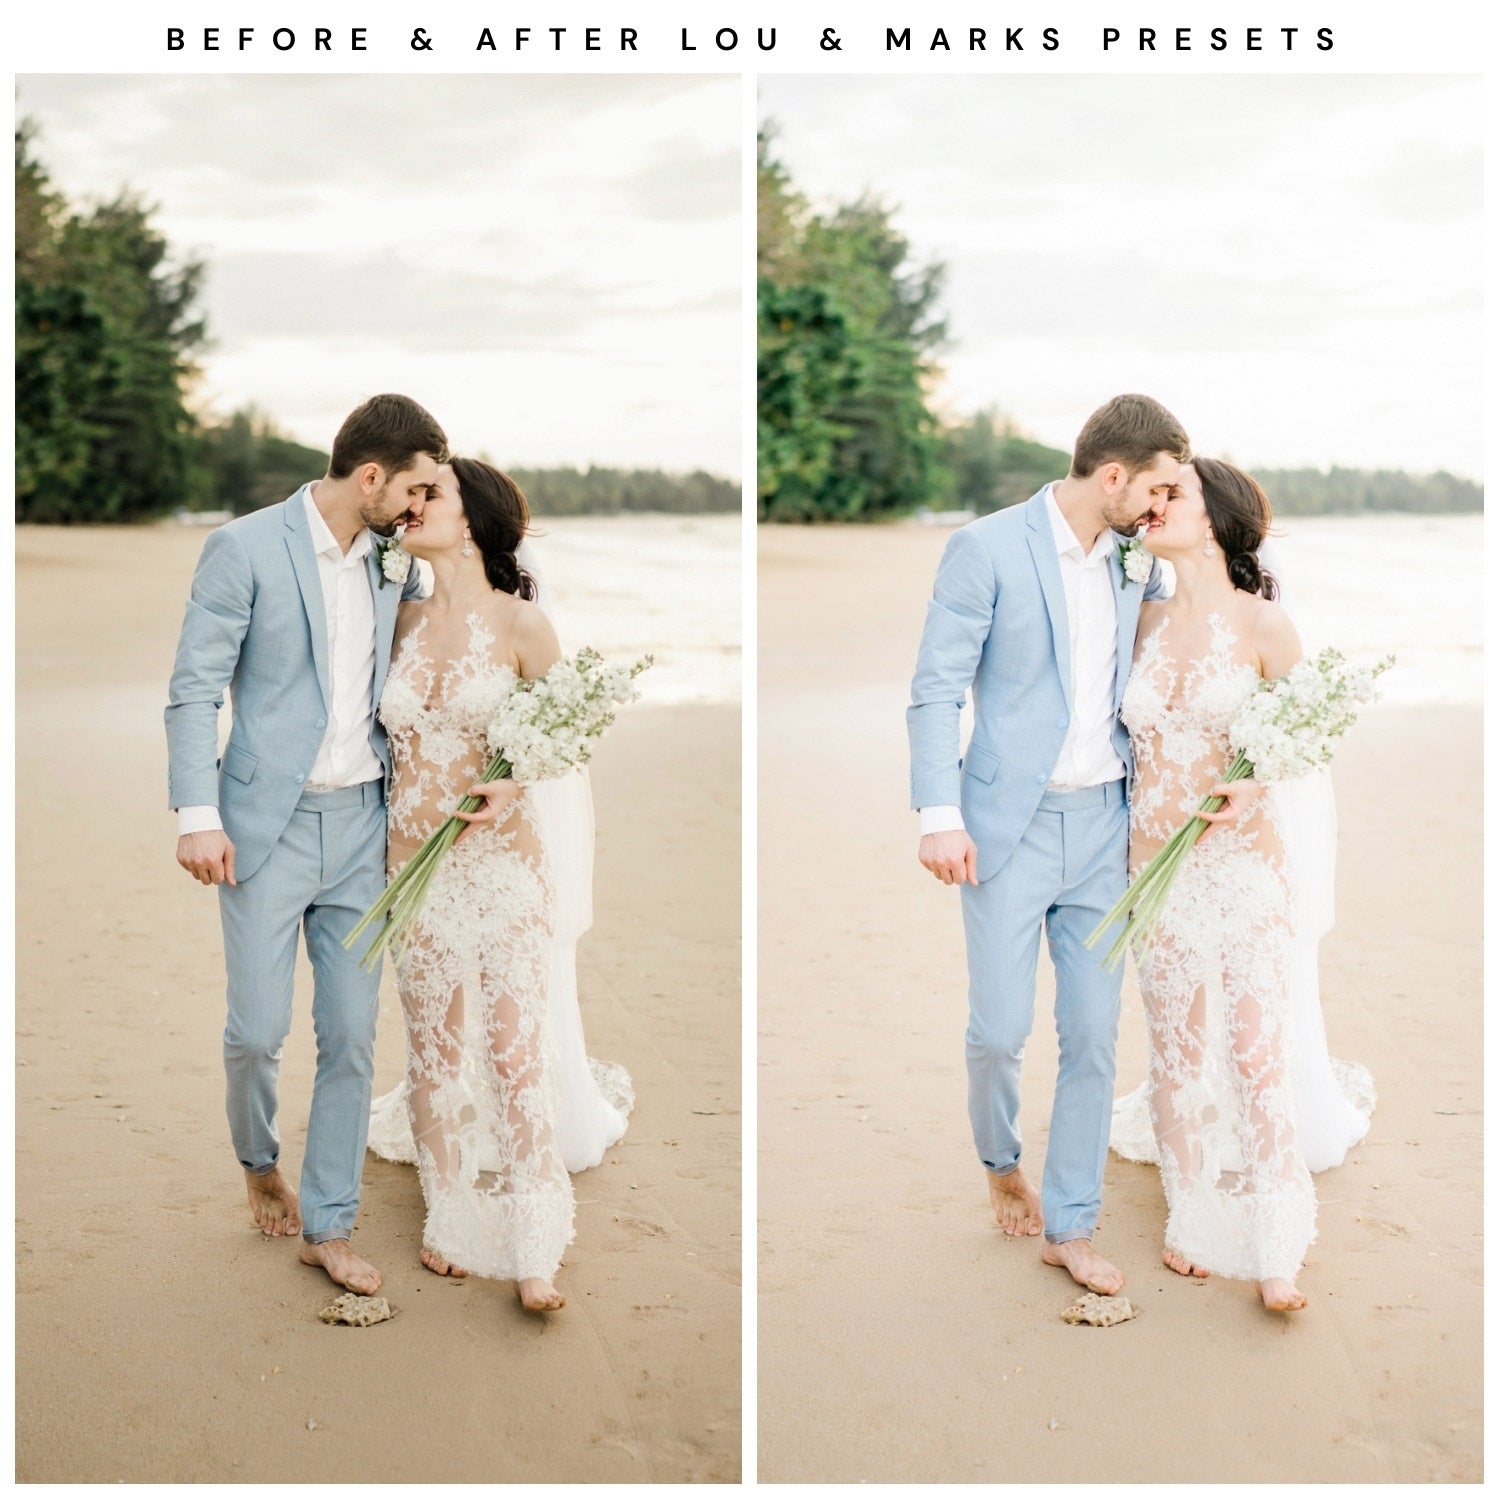 Lou & Marks Presets Light And Airy Lightroom Presets Bundle The Best Presets Beach Wedding